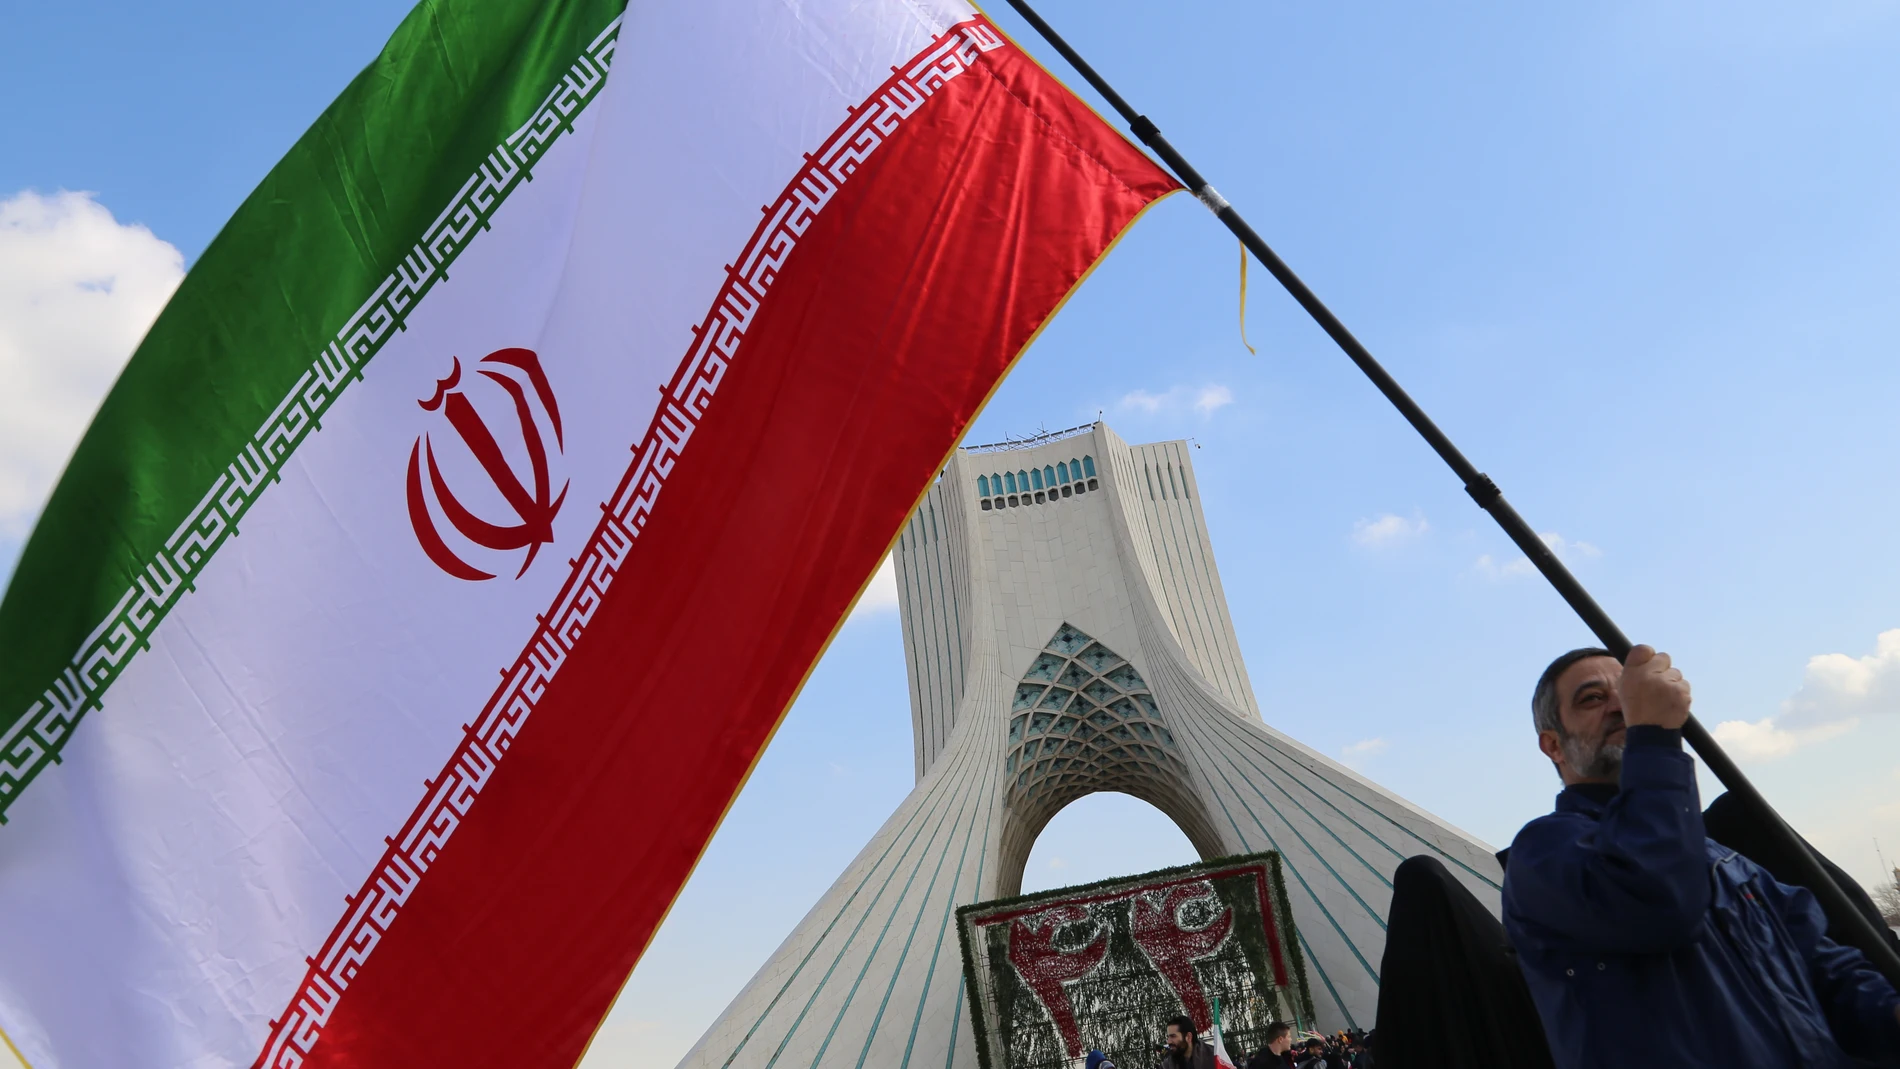 February 11, 2023, Tehran, Tehran, Iran: An Iranian man hold an Iranian flag next to Azadi (freedom) tower during the annual rally commemorating Iran's 1979 Islamic Revolution in Tehran, Iran, February 11, 2023. Iran on Saturday celebrated the 44th anniversary of the 1979 Islamic Revolution amid nationwide anti-government protests and heightened tensions with the West. Tens of thousands of Iranians hit the streets in Tehran and other cities today to mark the 44th anniversary of the Islamic re...